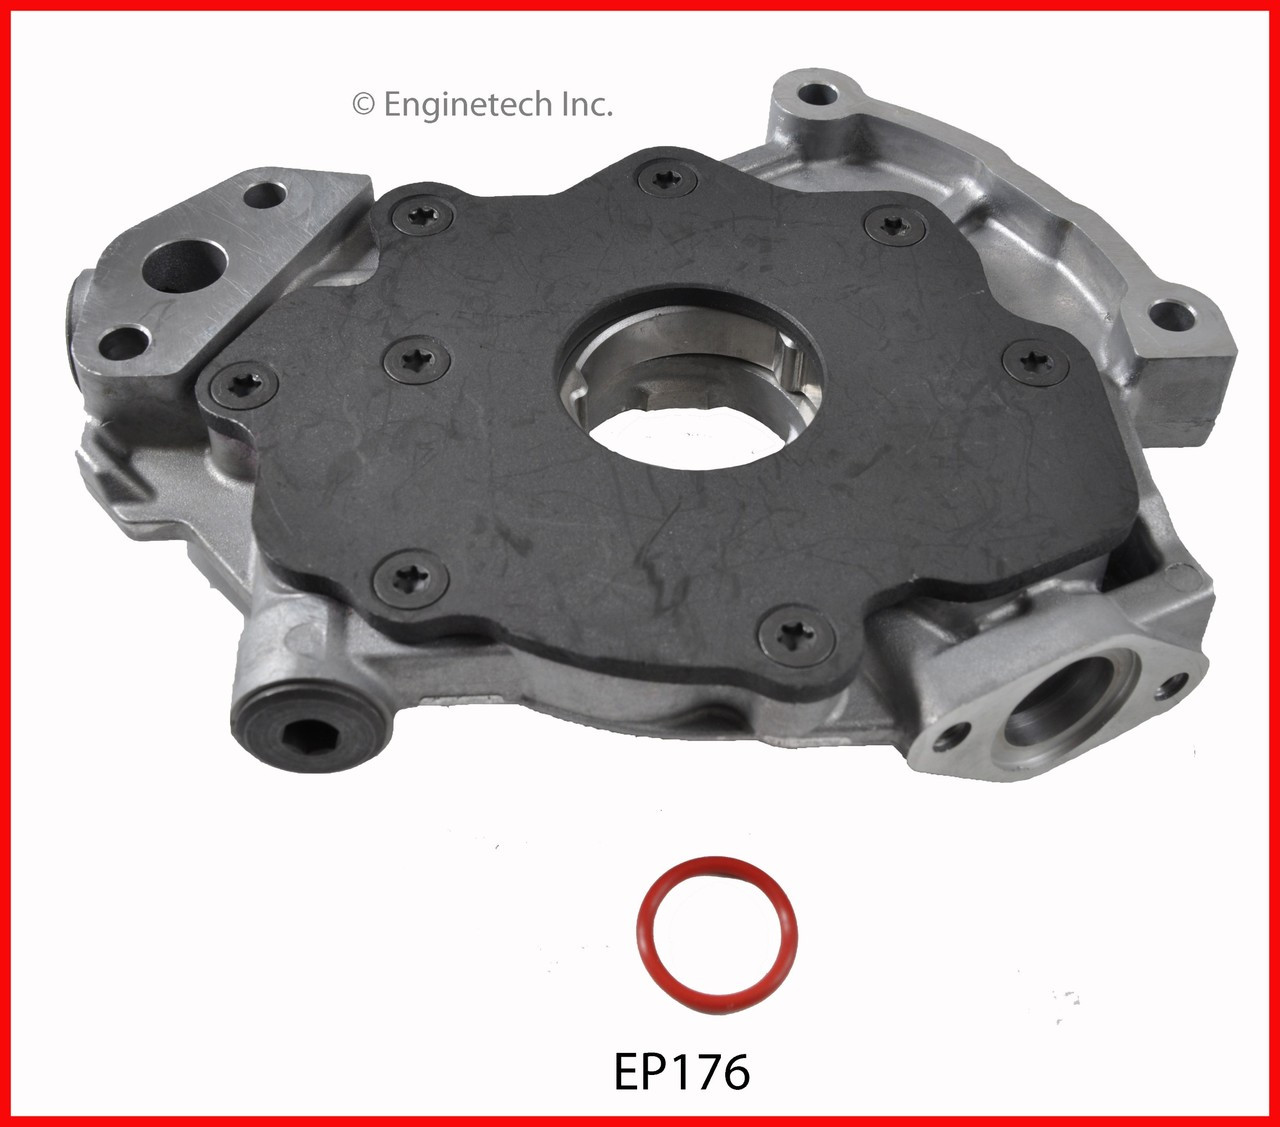 Oil Pump - 2001 Ford Mustang 4.6L (EP176.K153)